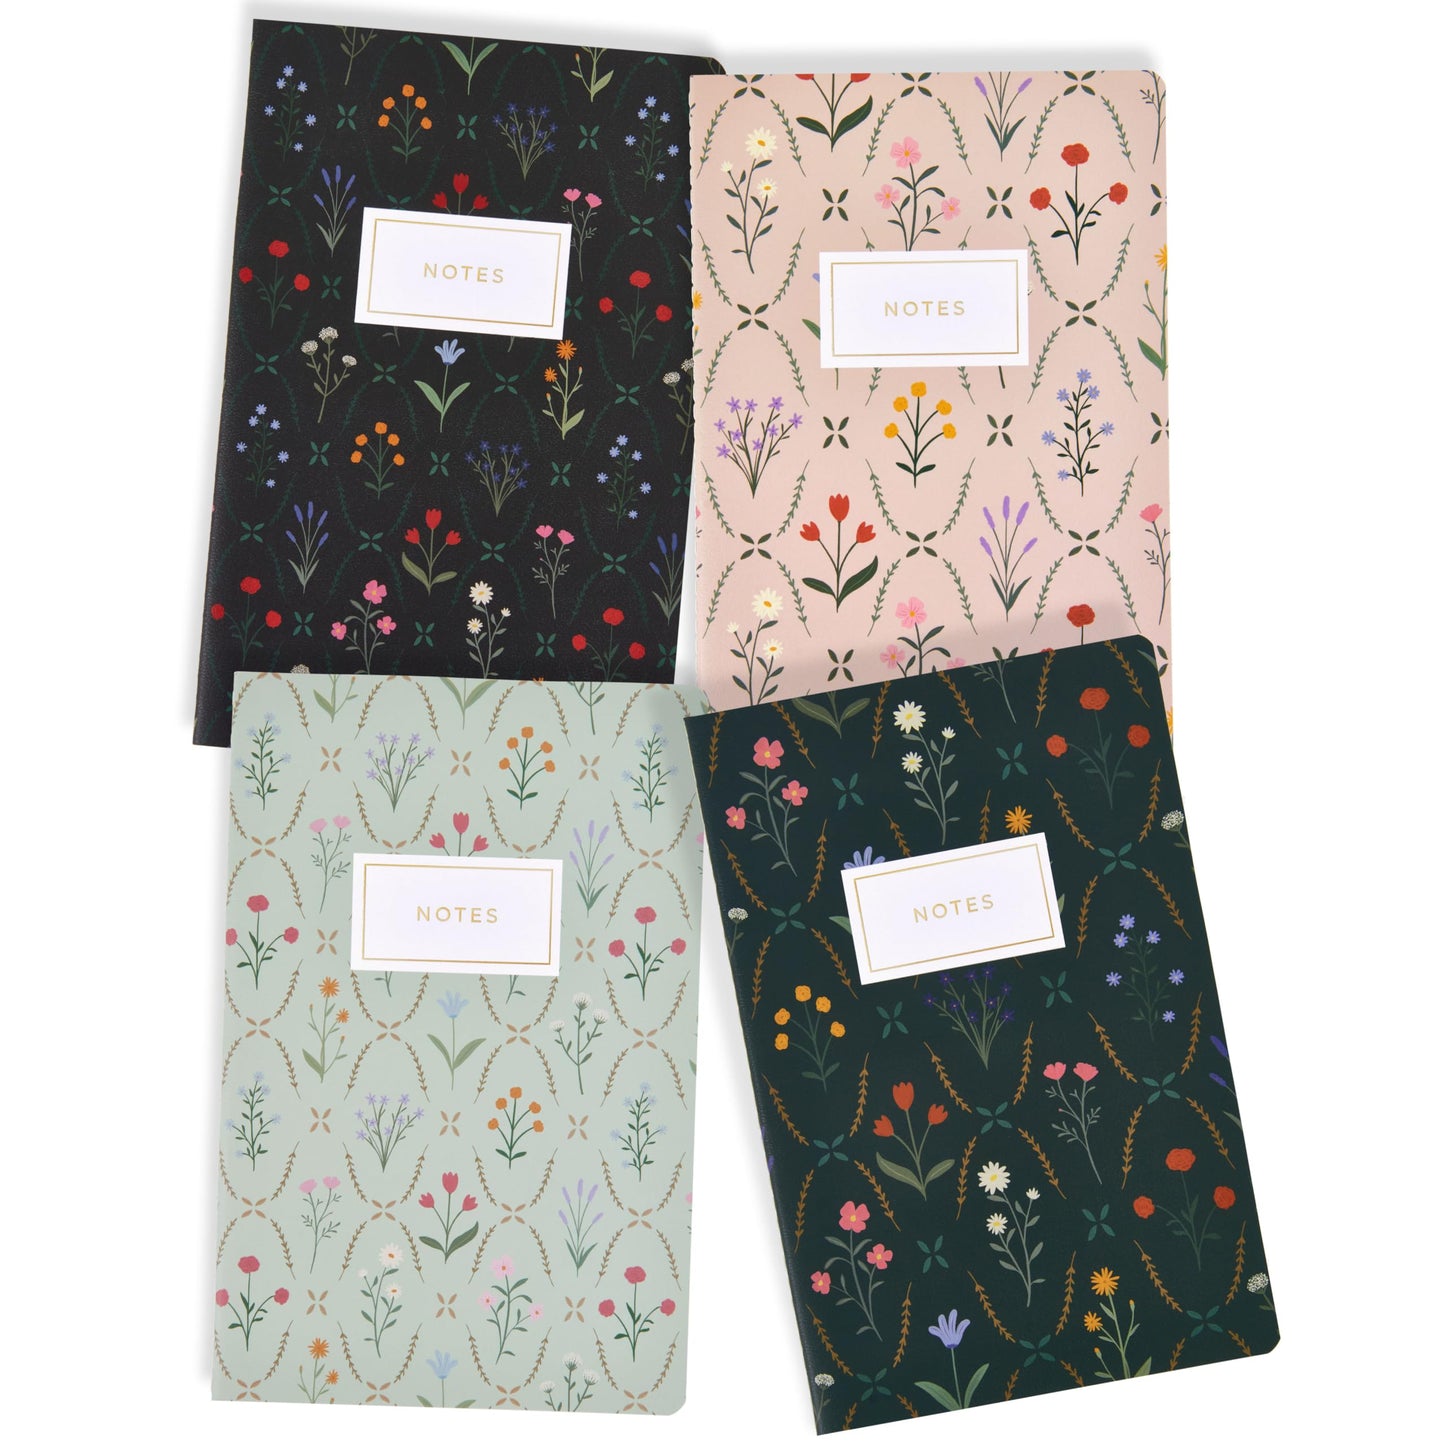 ZICOTO Aesthetic Journal Notebook Set of 4 For Women - Cute College Ruled A5 Journaling Notebooks with Lined Pages - Perfect For Writing And Staying Organized at Work or School